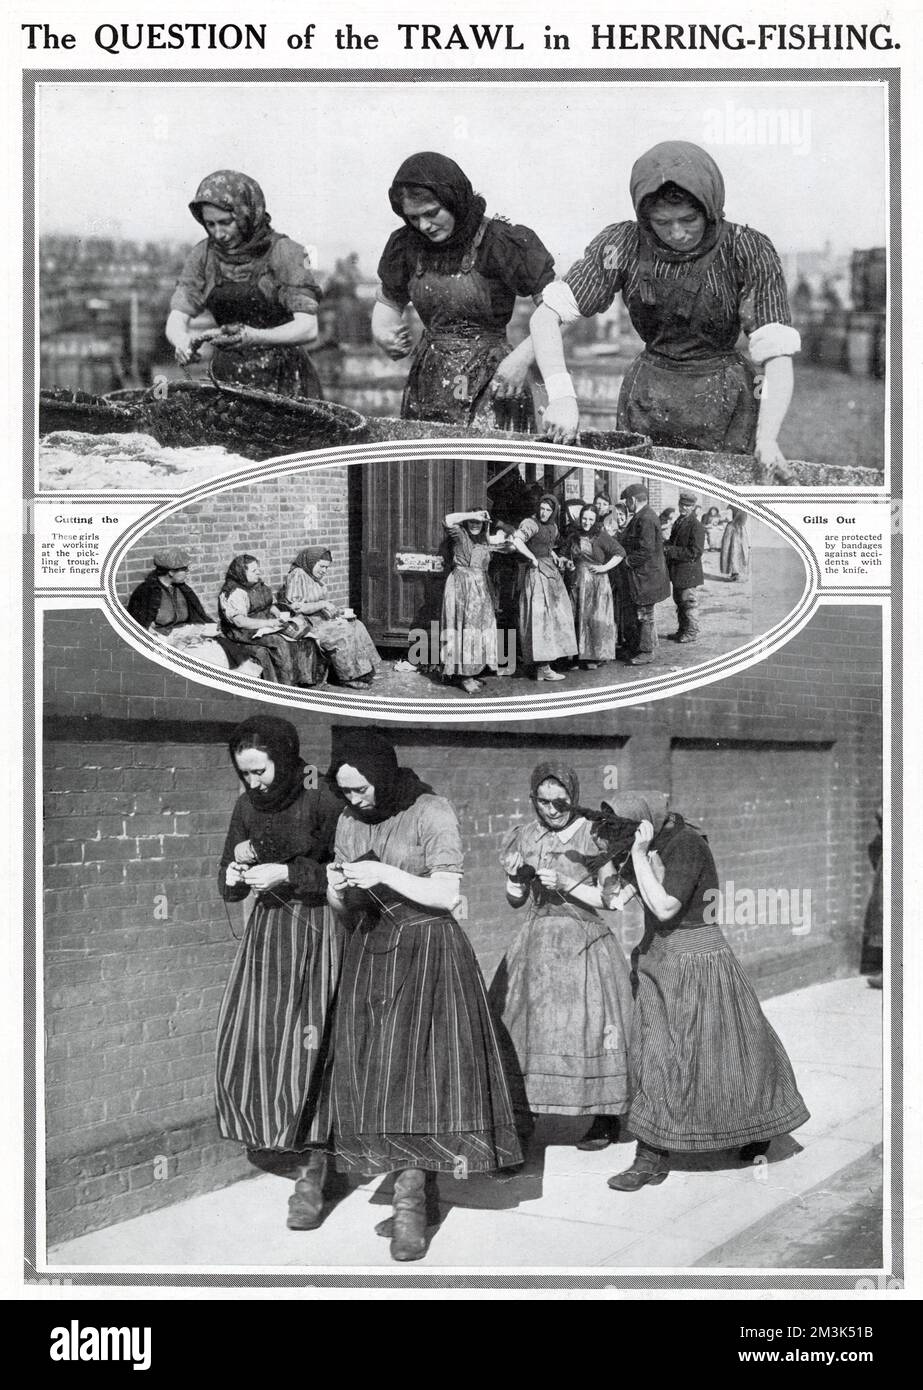 Fisher women who worked for the herring fleet on the East coast of Britain. At top, three women stand at the pickling trough, gutting and pickling herring. At centre, a group of women taking a break from their labours. At bottom, four women knitting as they walk, perhaps wearing their best clothes on a Sunday. Stock Photo